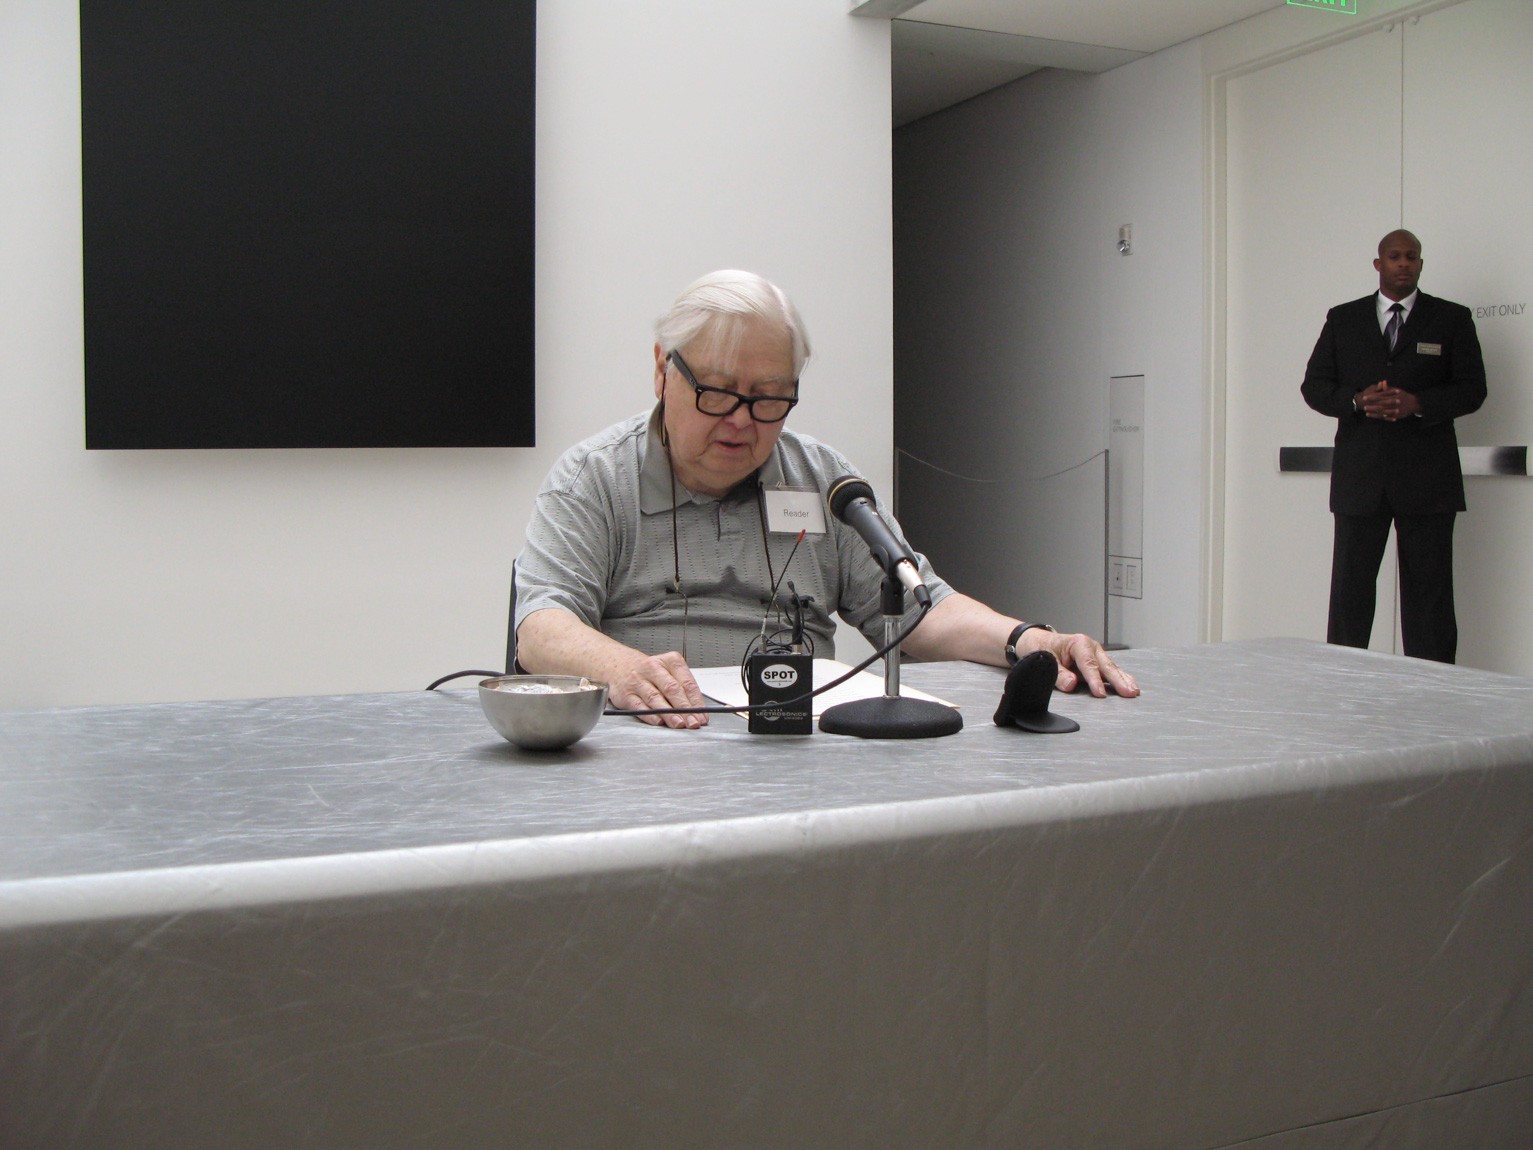 A community member sits at a table in front of Ellsworth Kelly's "Blue Black" and reads from a page into a microphone.